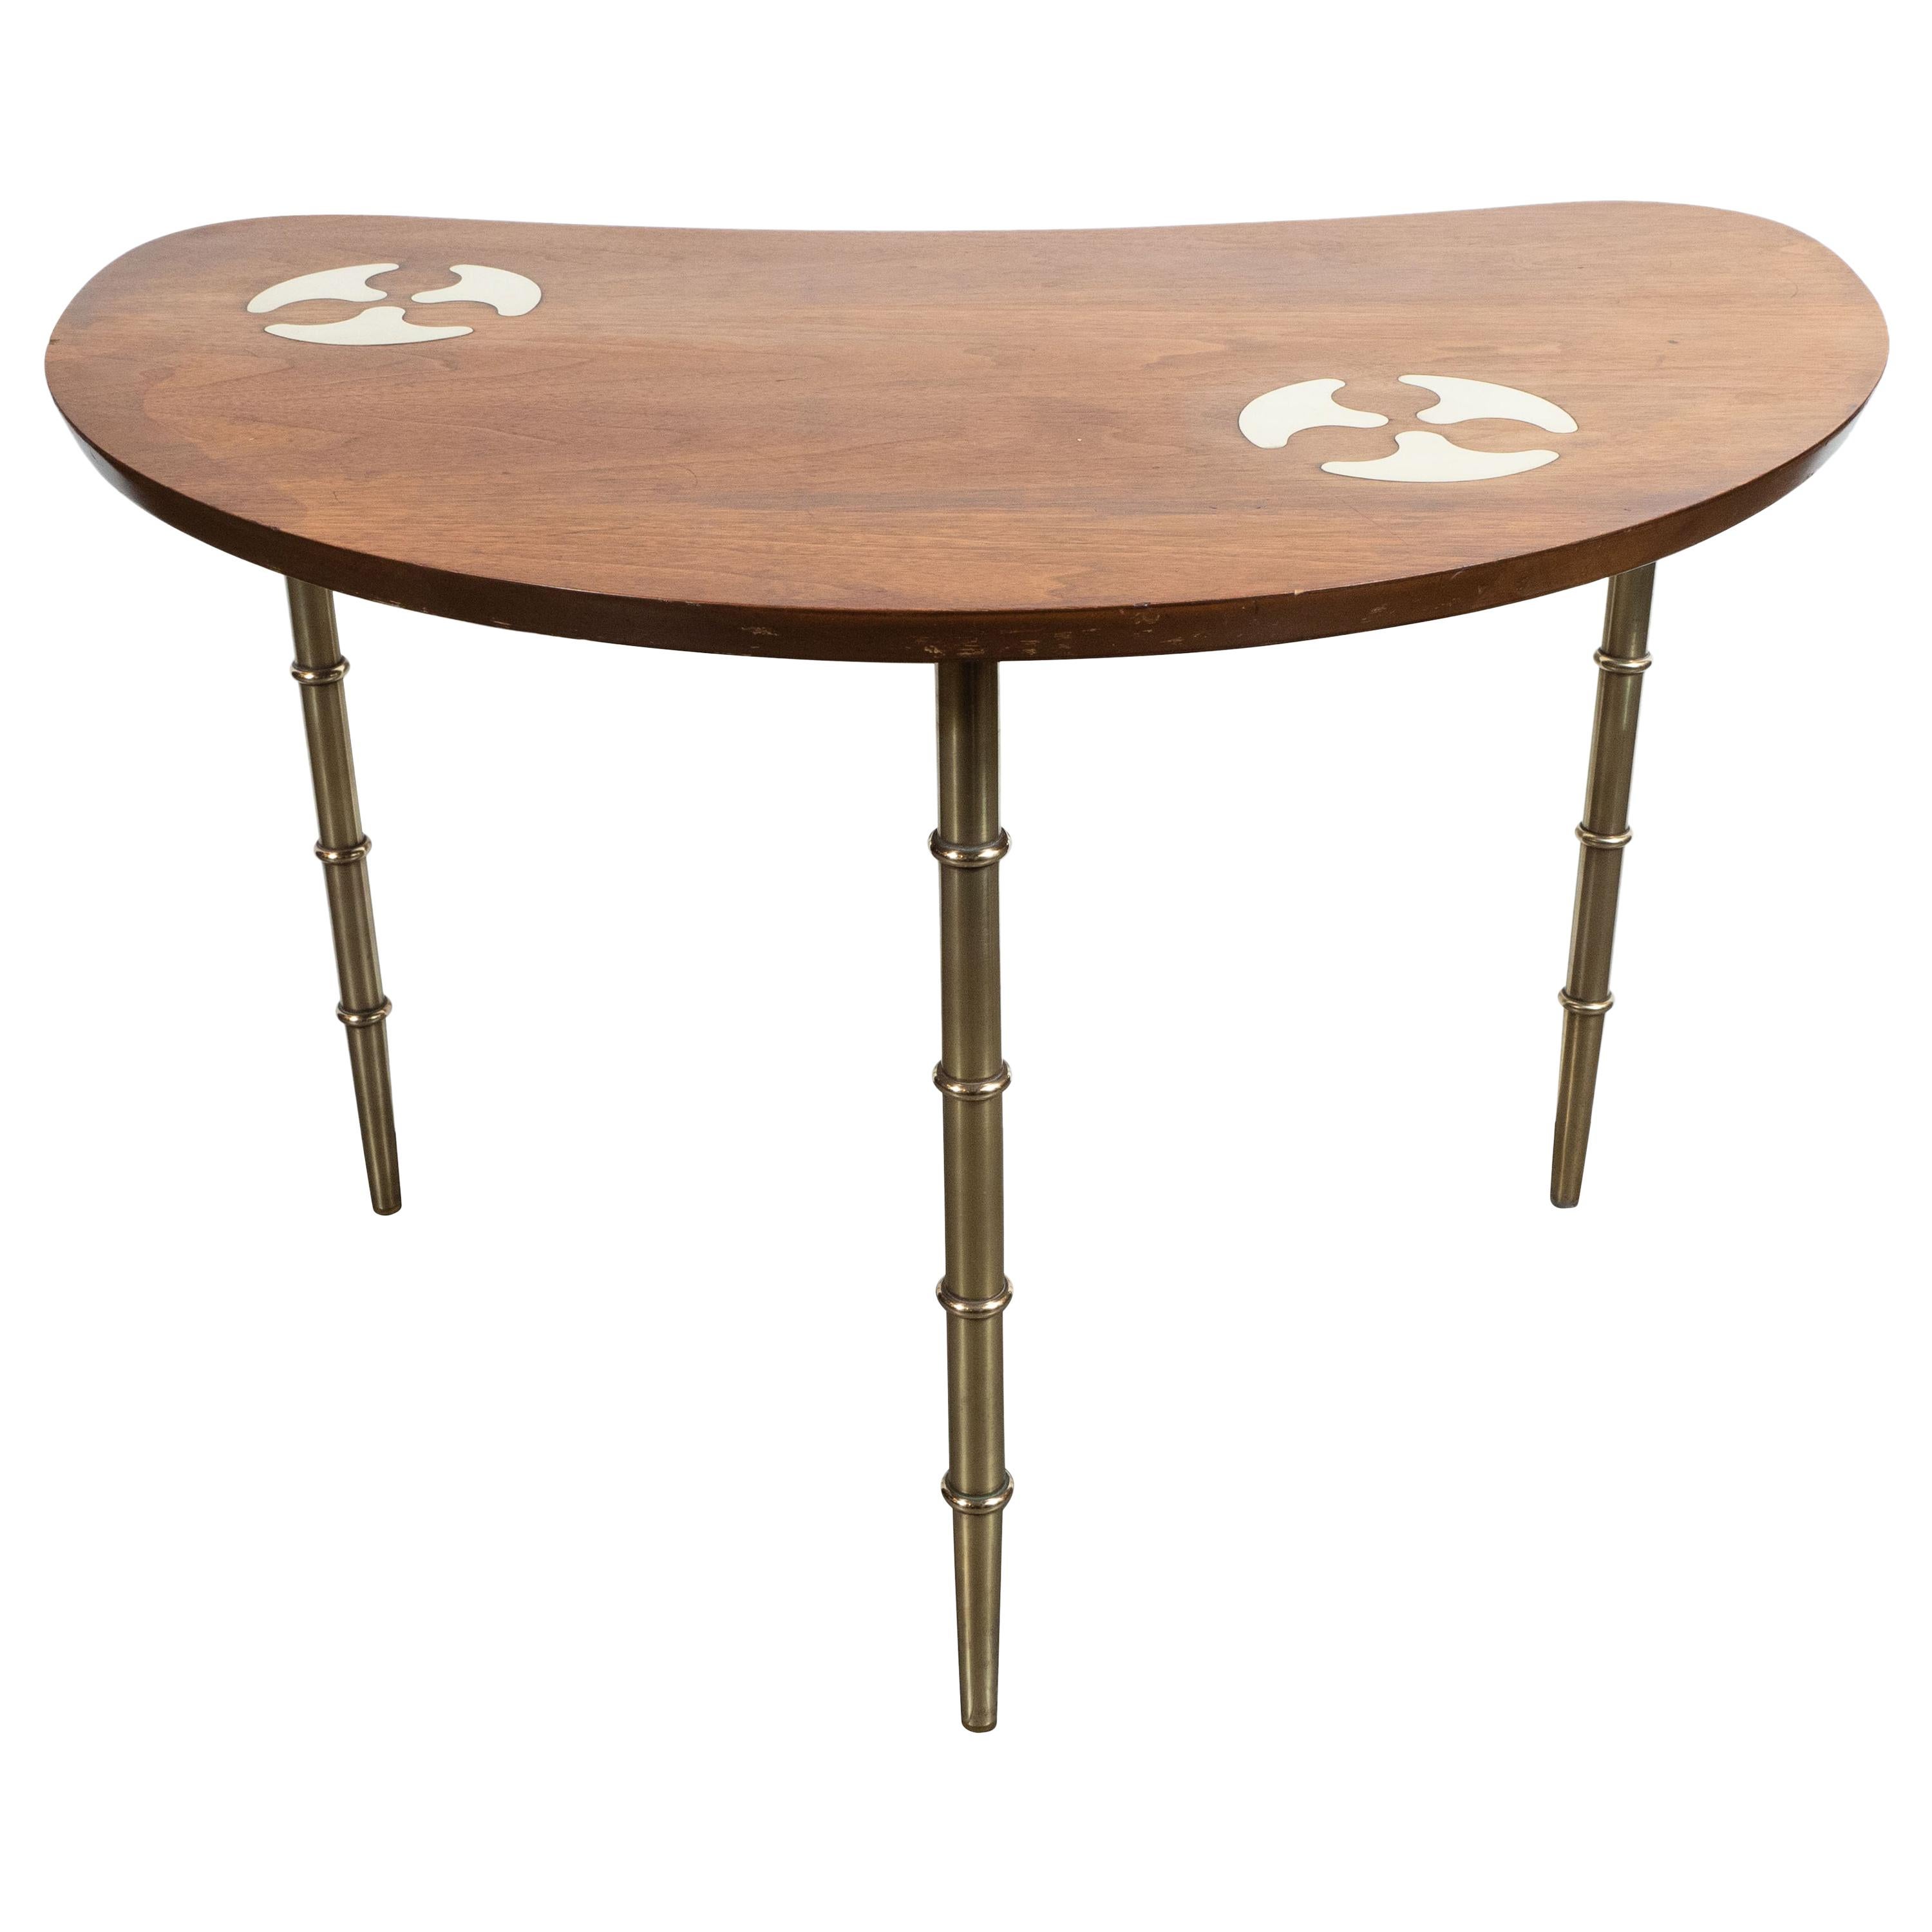 Midcentury Organic Inlaid Brass & Walnut Bowfront Side/End Table by Mastercraft For Sale